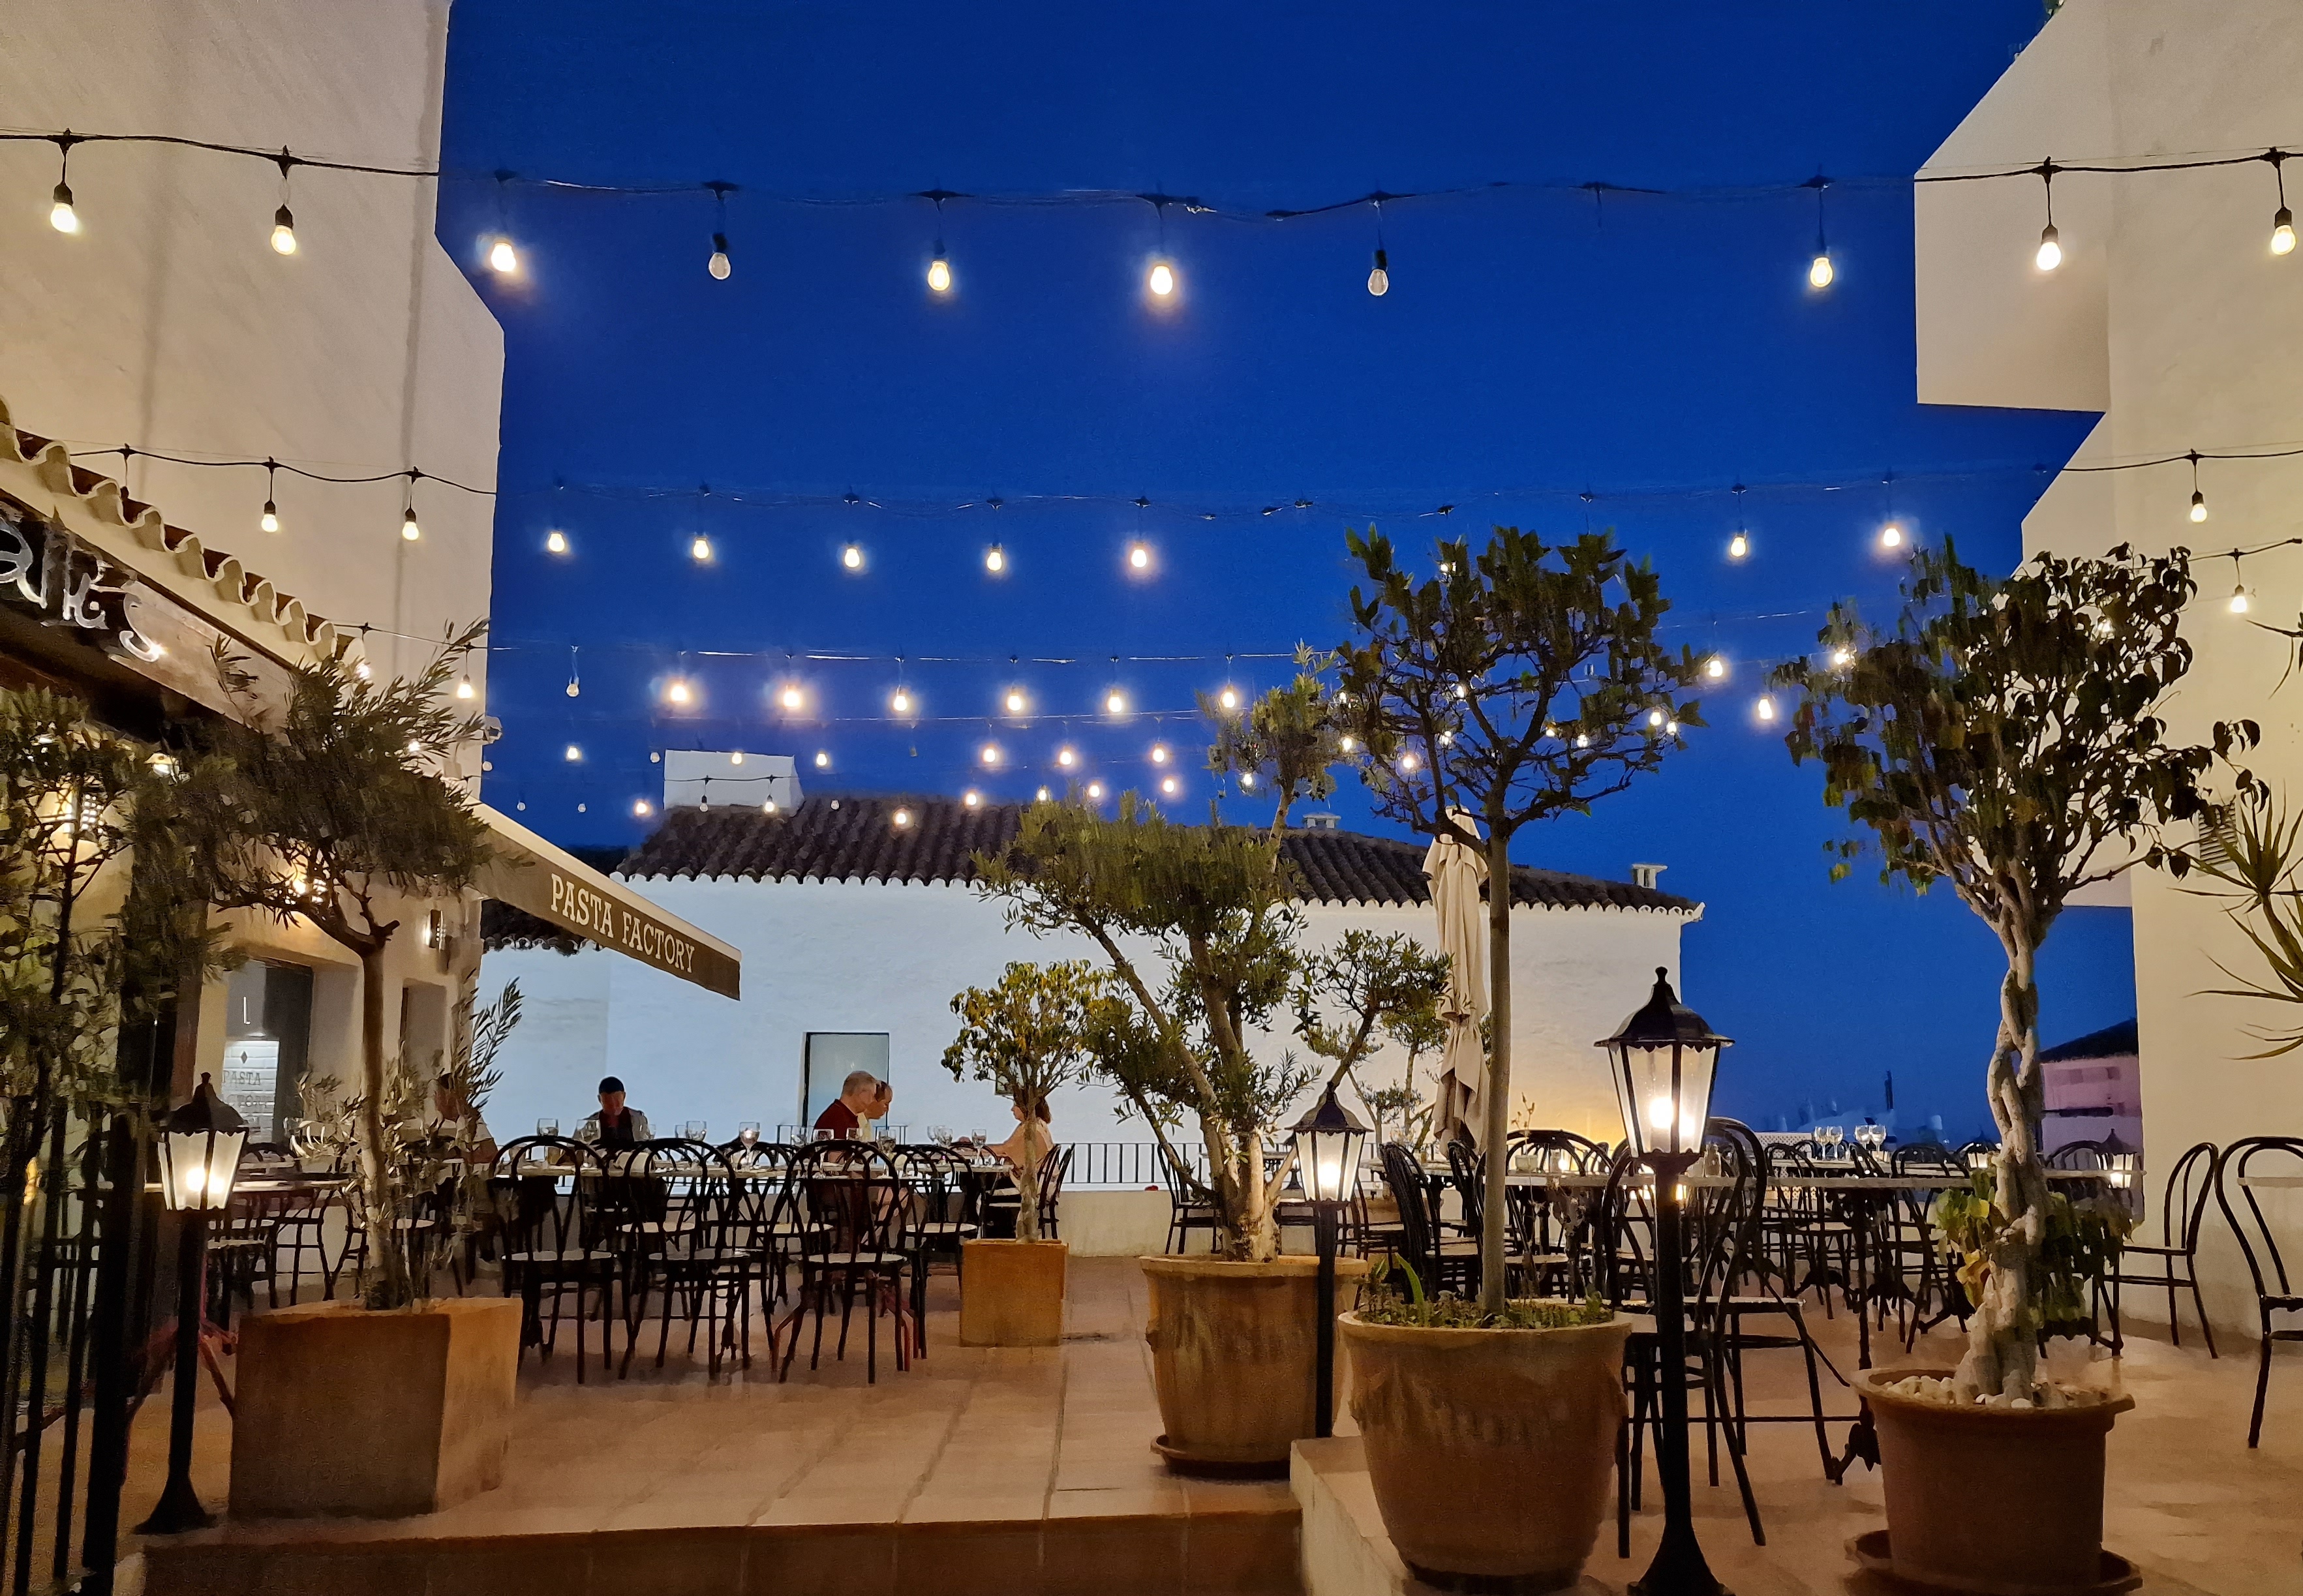 Pasta Factory in Puerto Banús is Offering a Huge 45% Discount on a Two-Course Meal Plus a Drink!